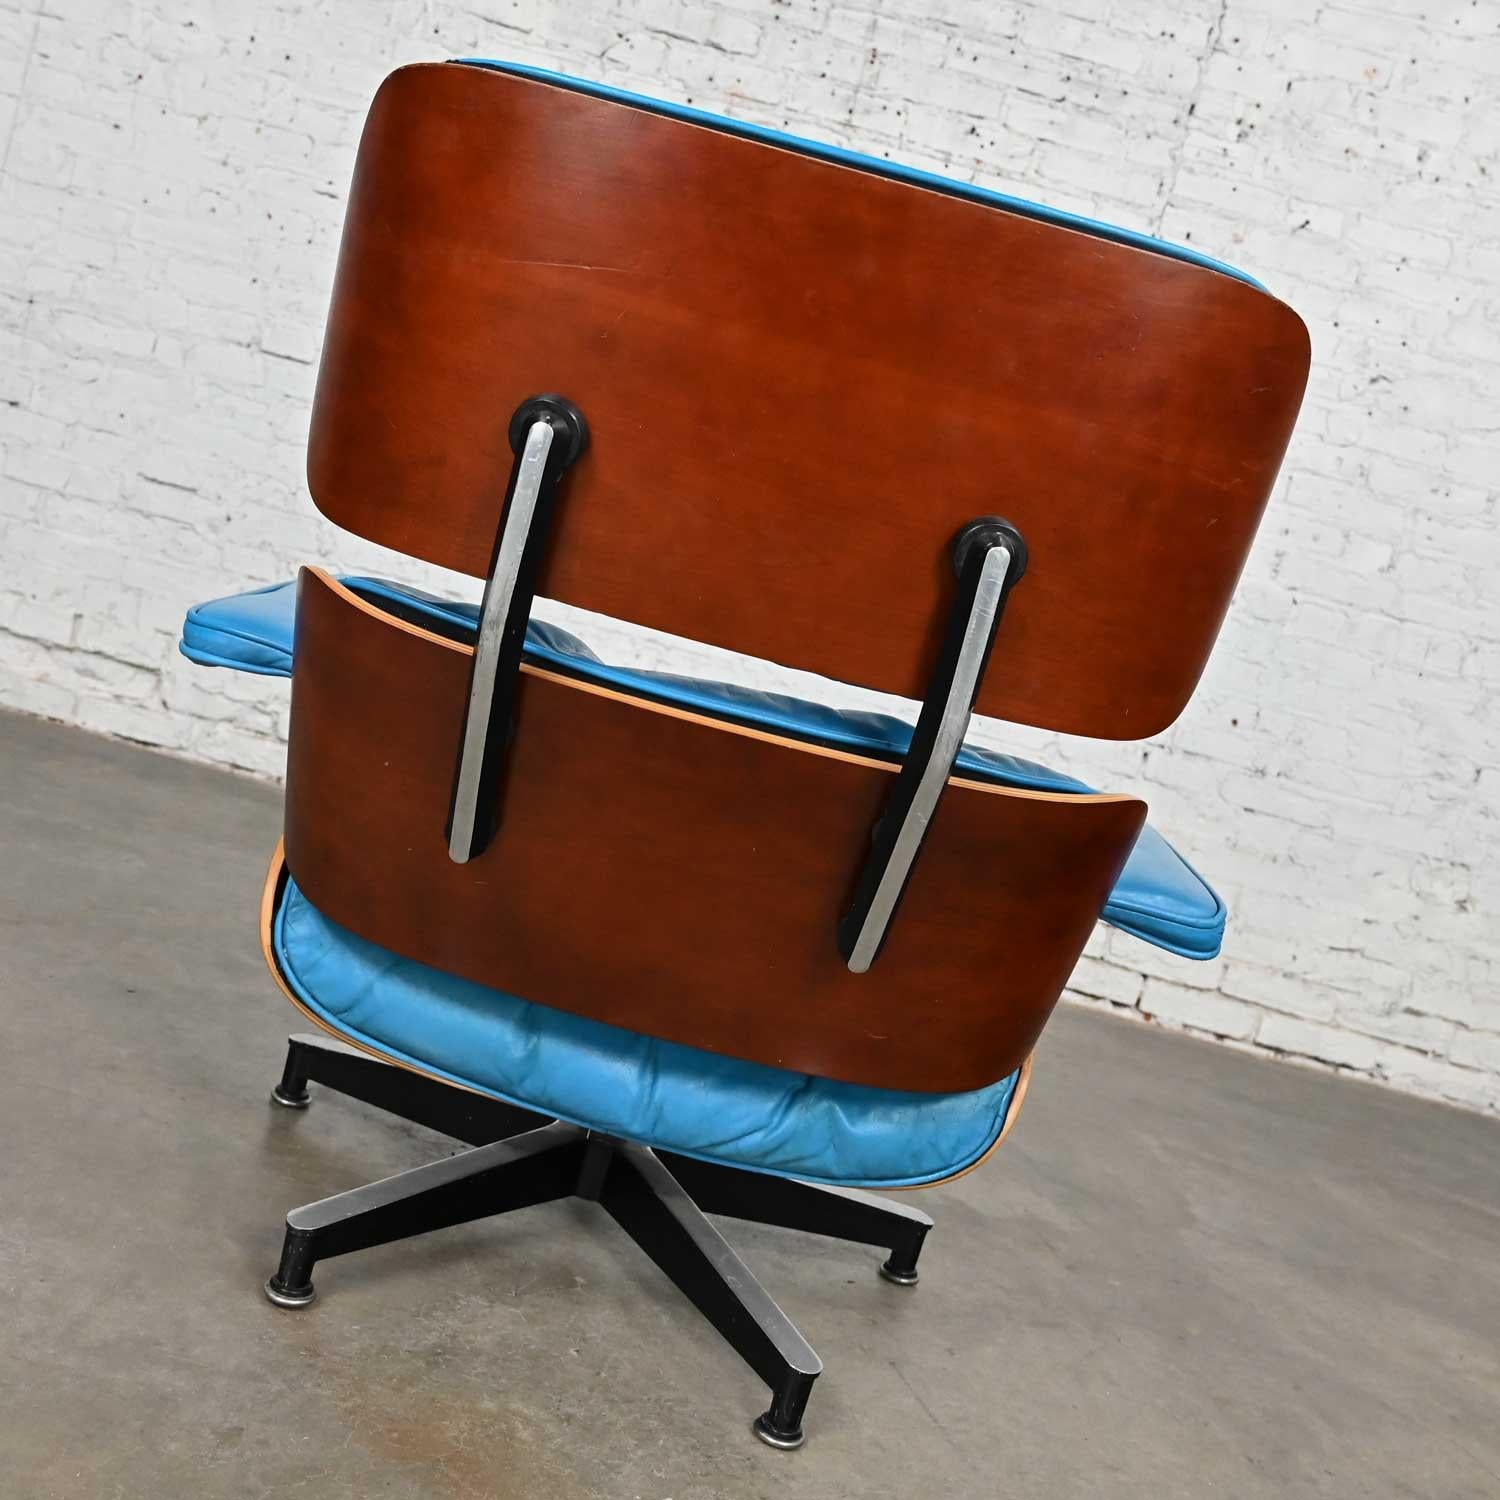 Aluminum Eames 670 Lounge Chair 671 Ottoman Blue Leather Walnut Rosewood Herman Miller